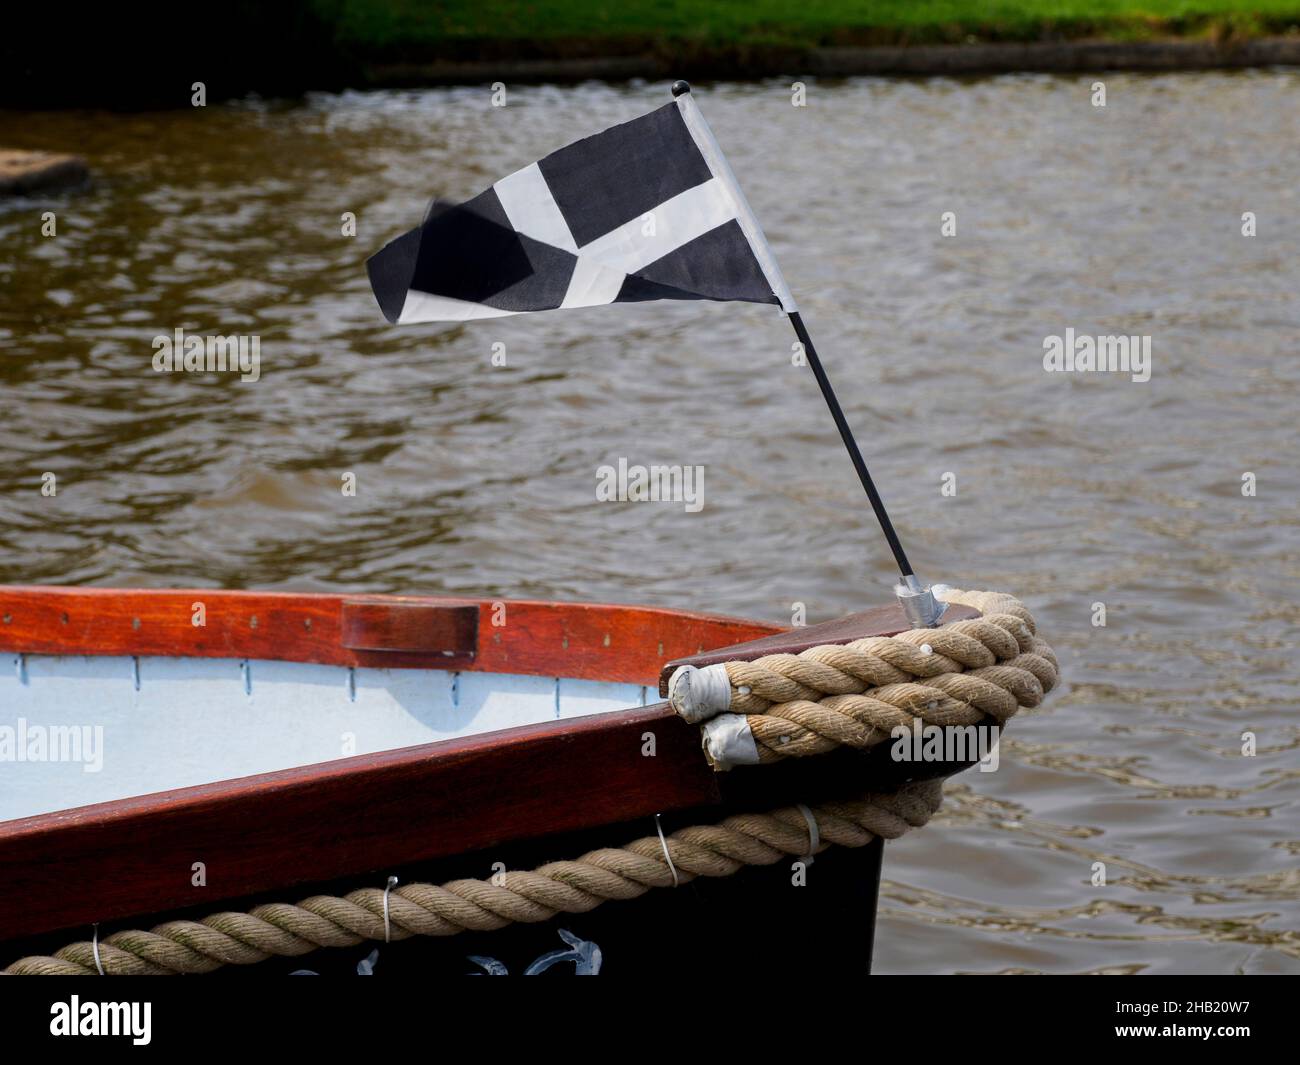 The Cornish Flag (St Piran's) flying on the bow of a boat, Bude, Cornwall, UK Stock Photo